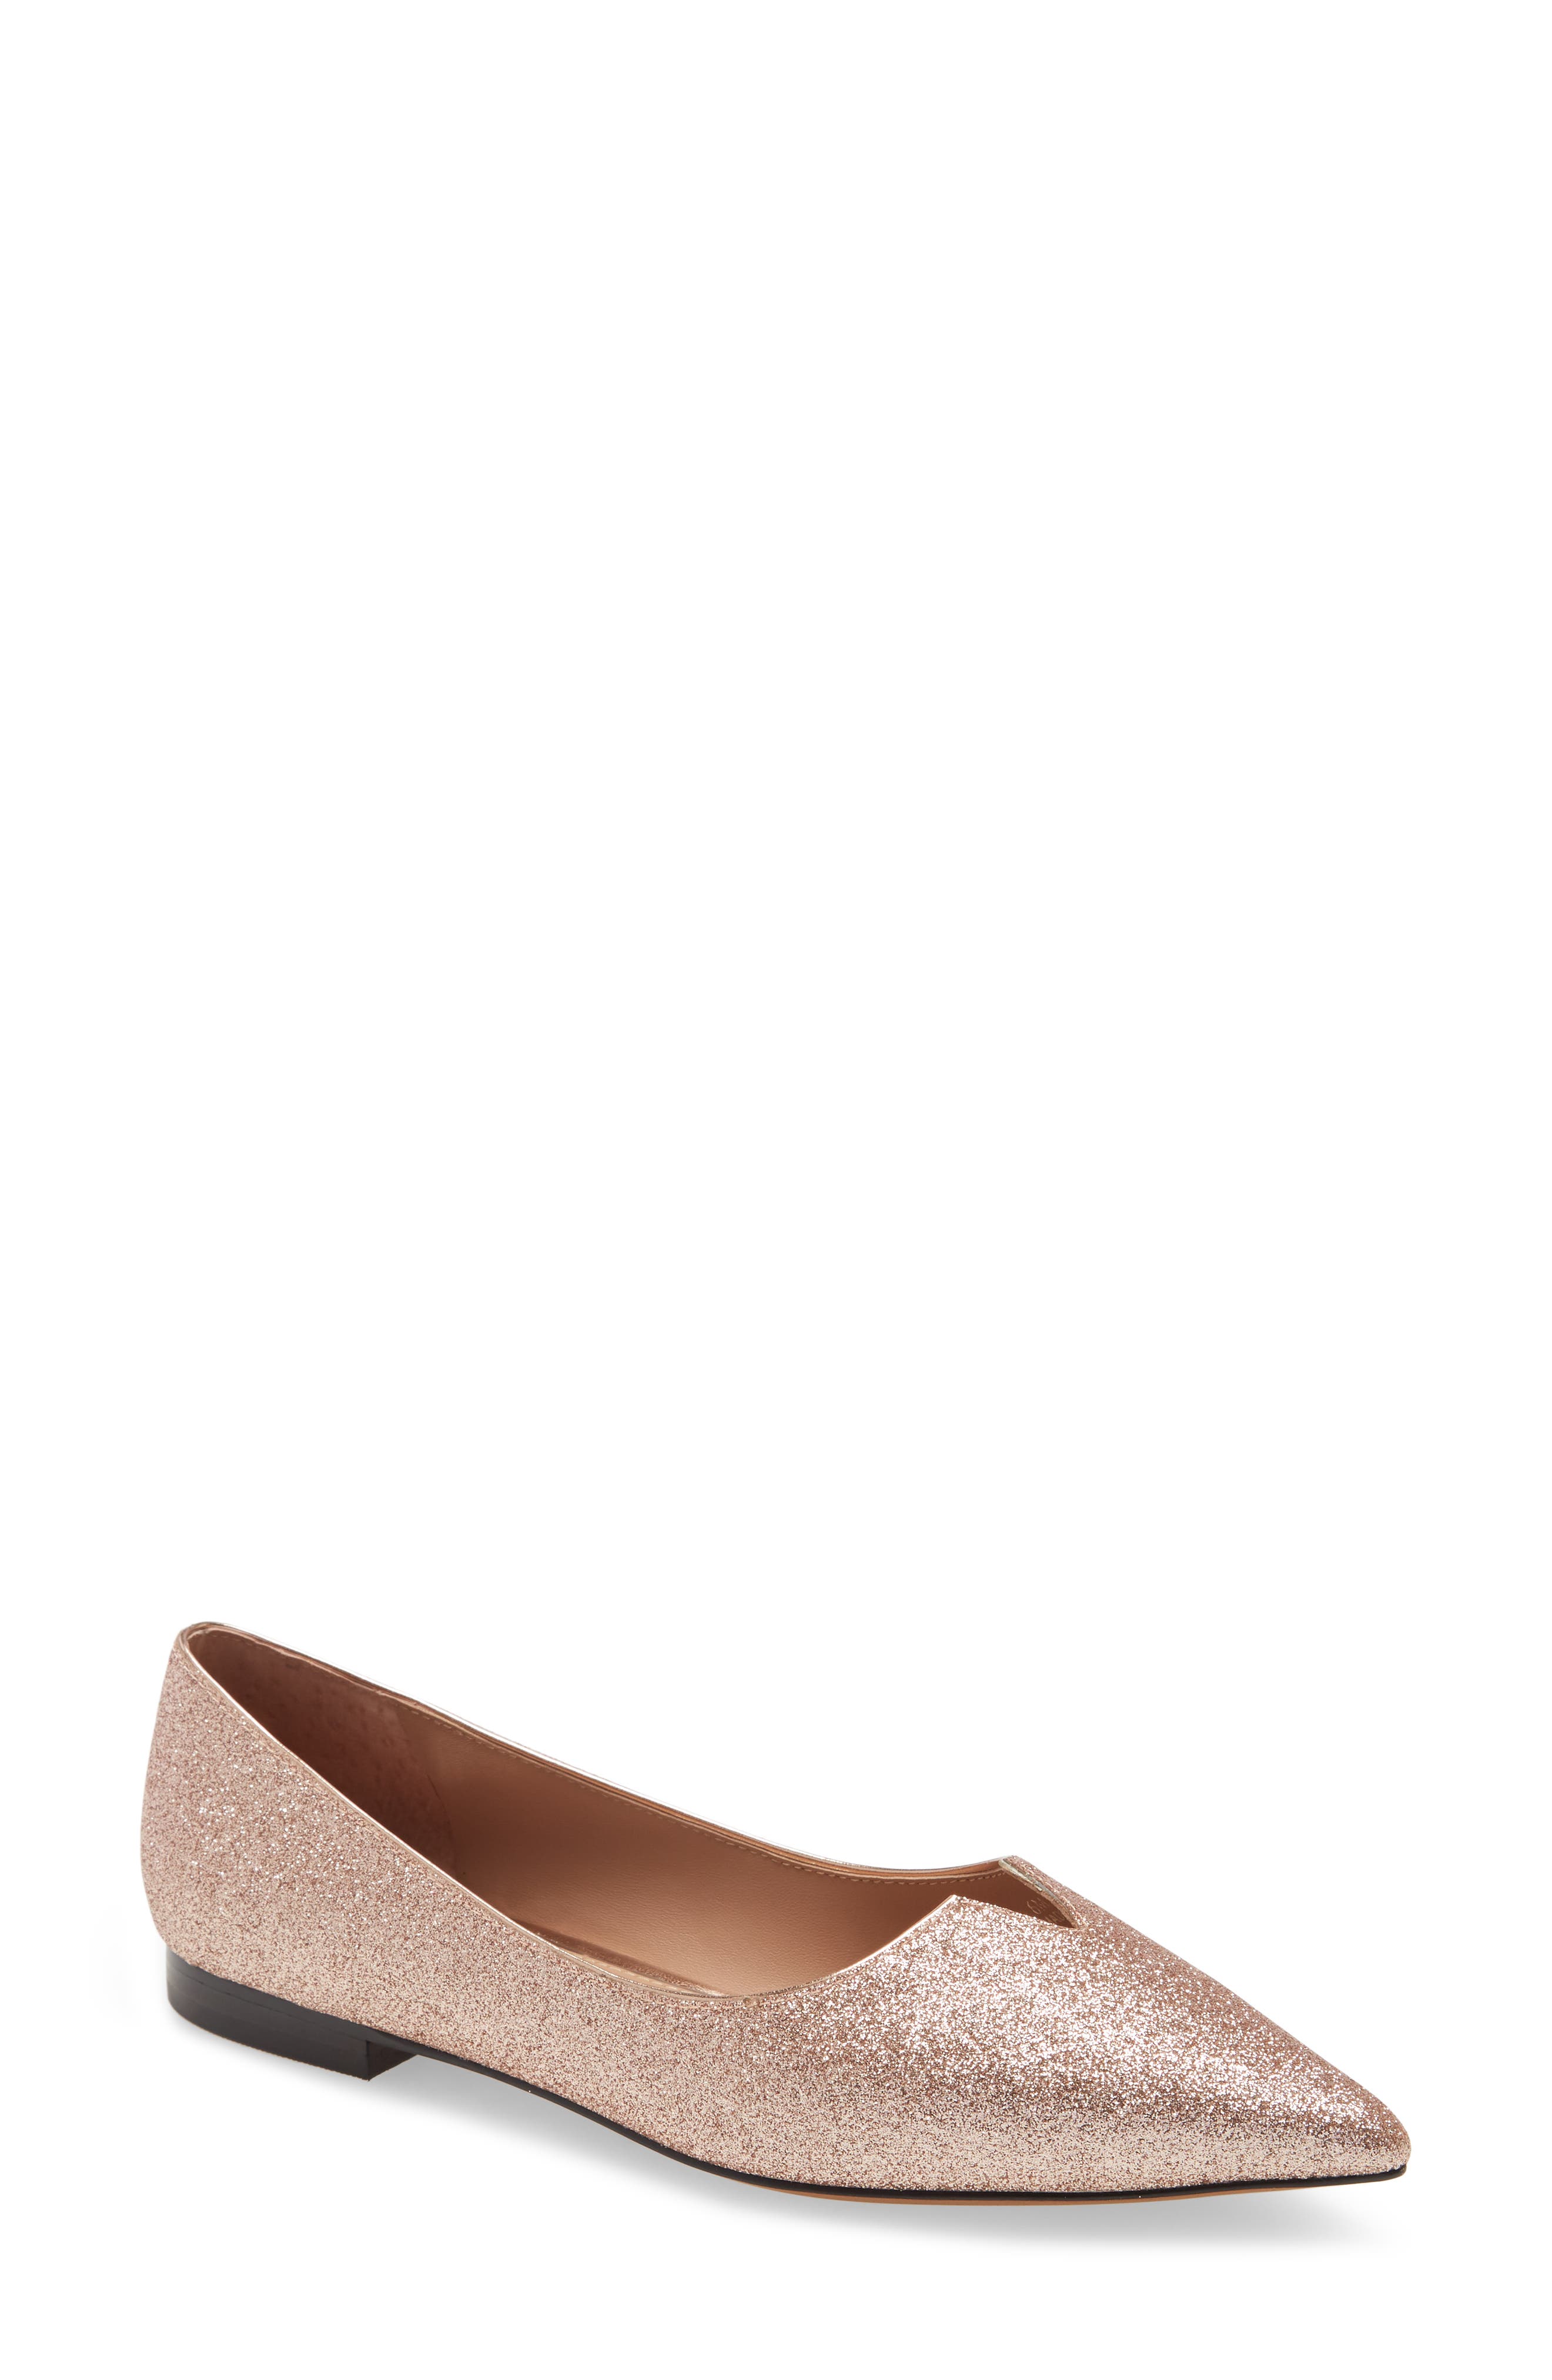 dusty pink flat shoes